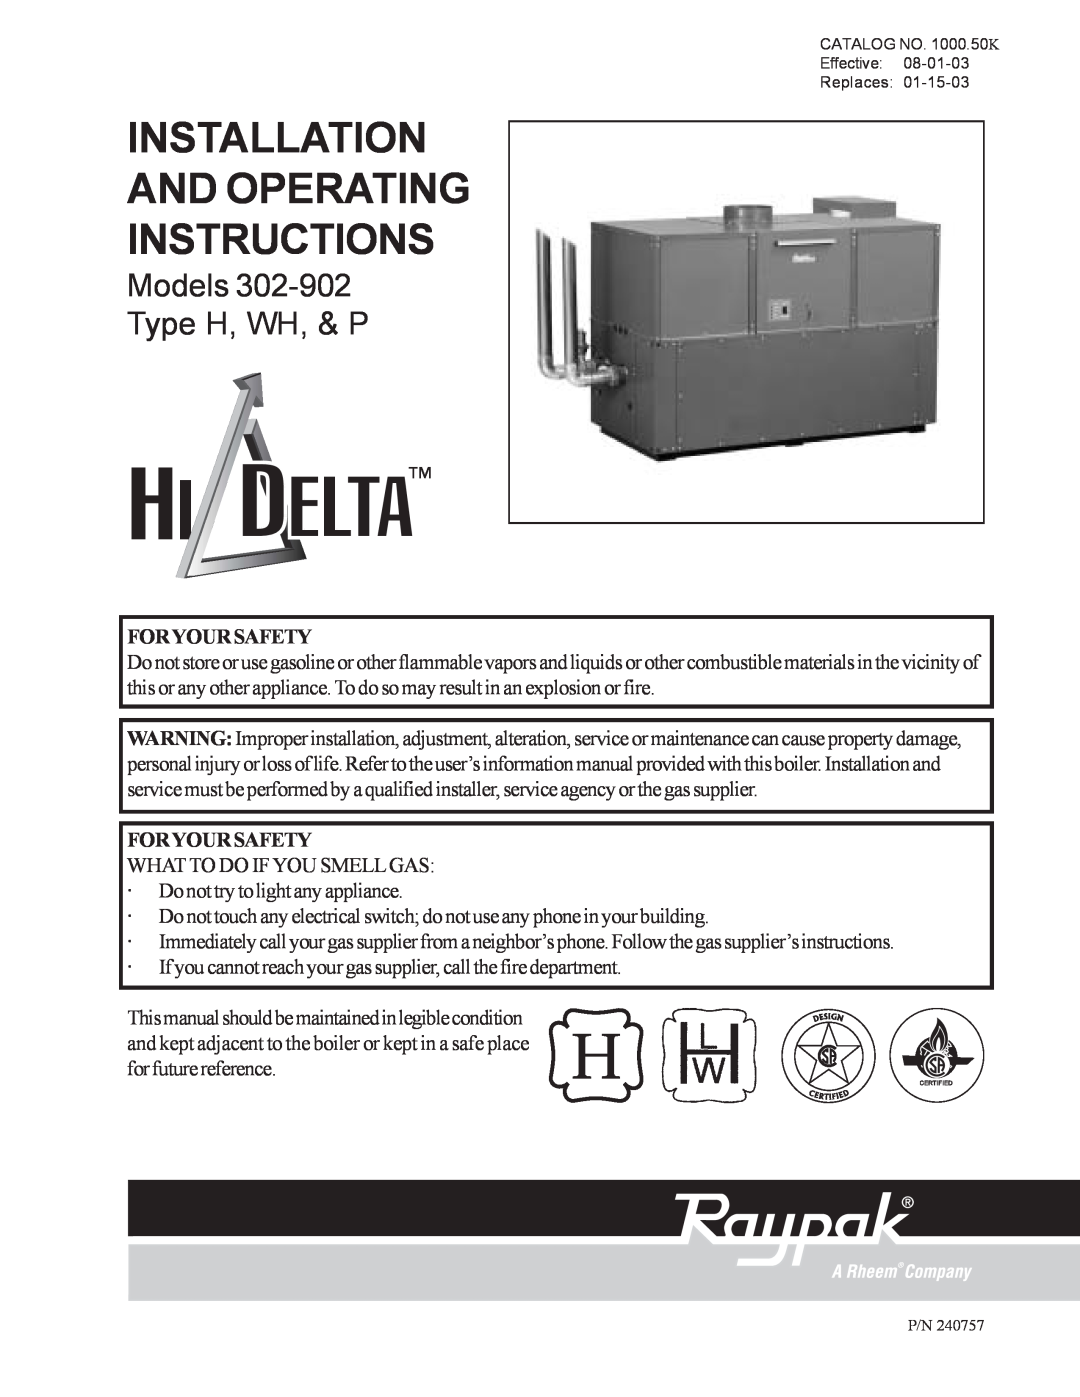 Raypak 302-902 manual Models Type H, WH, & P, Foryoursafety, Installation And Operating Instructions 